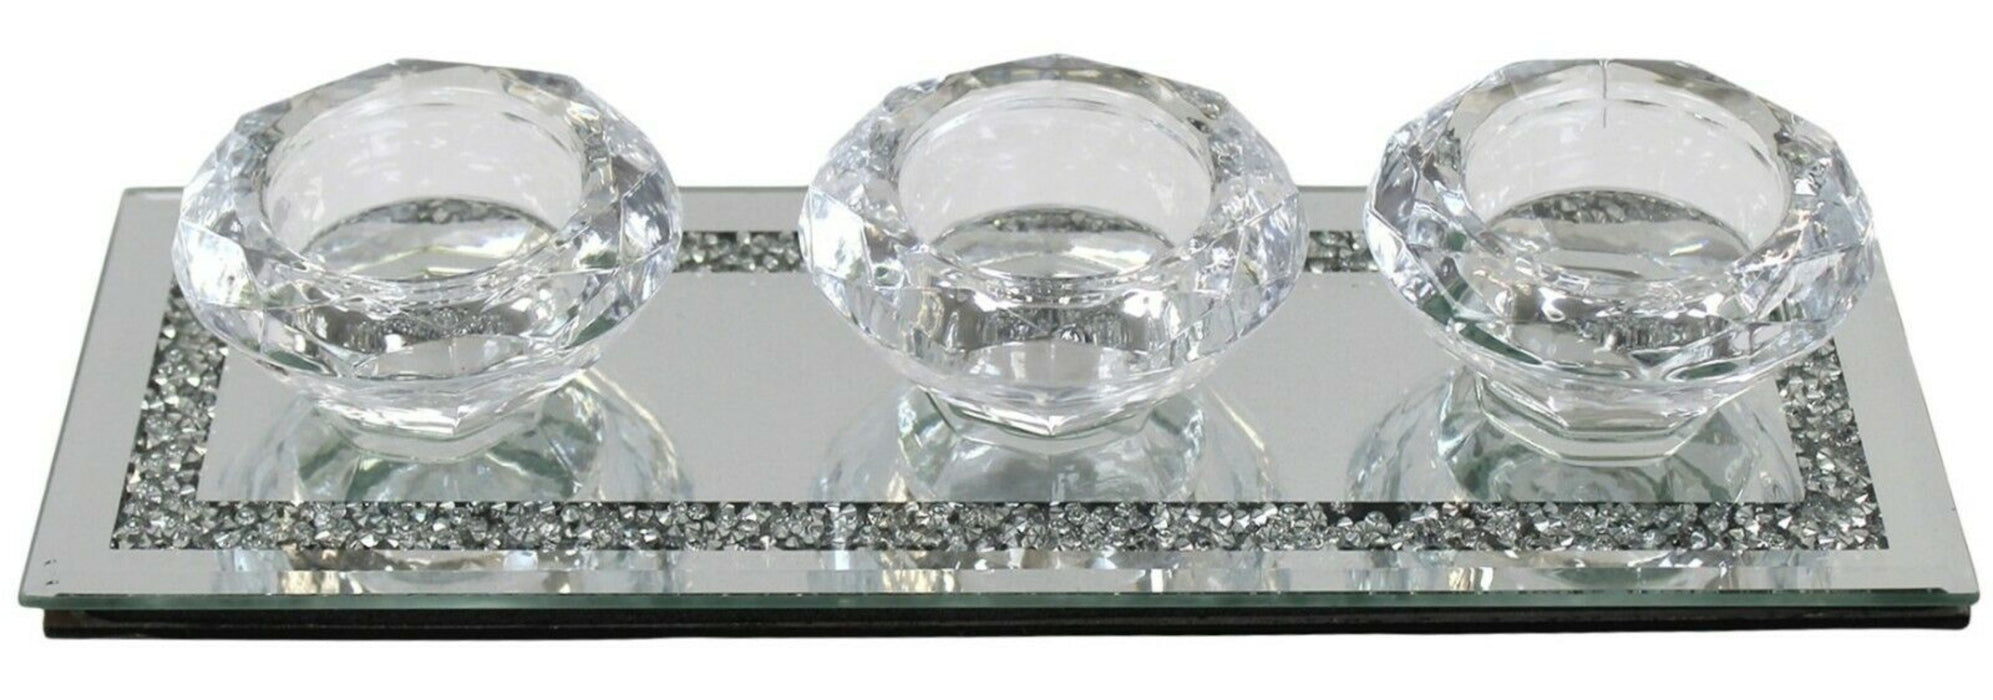 Glass Tea Light Holder Mirrored Glass Candle Holder Crushed Dimaonds Effect